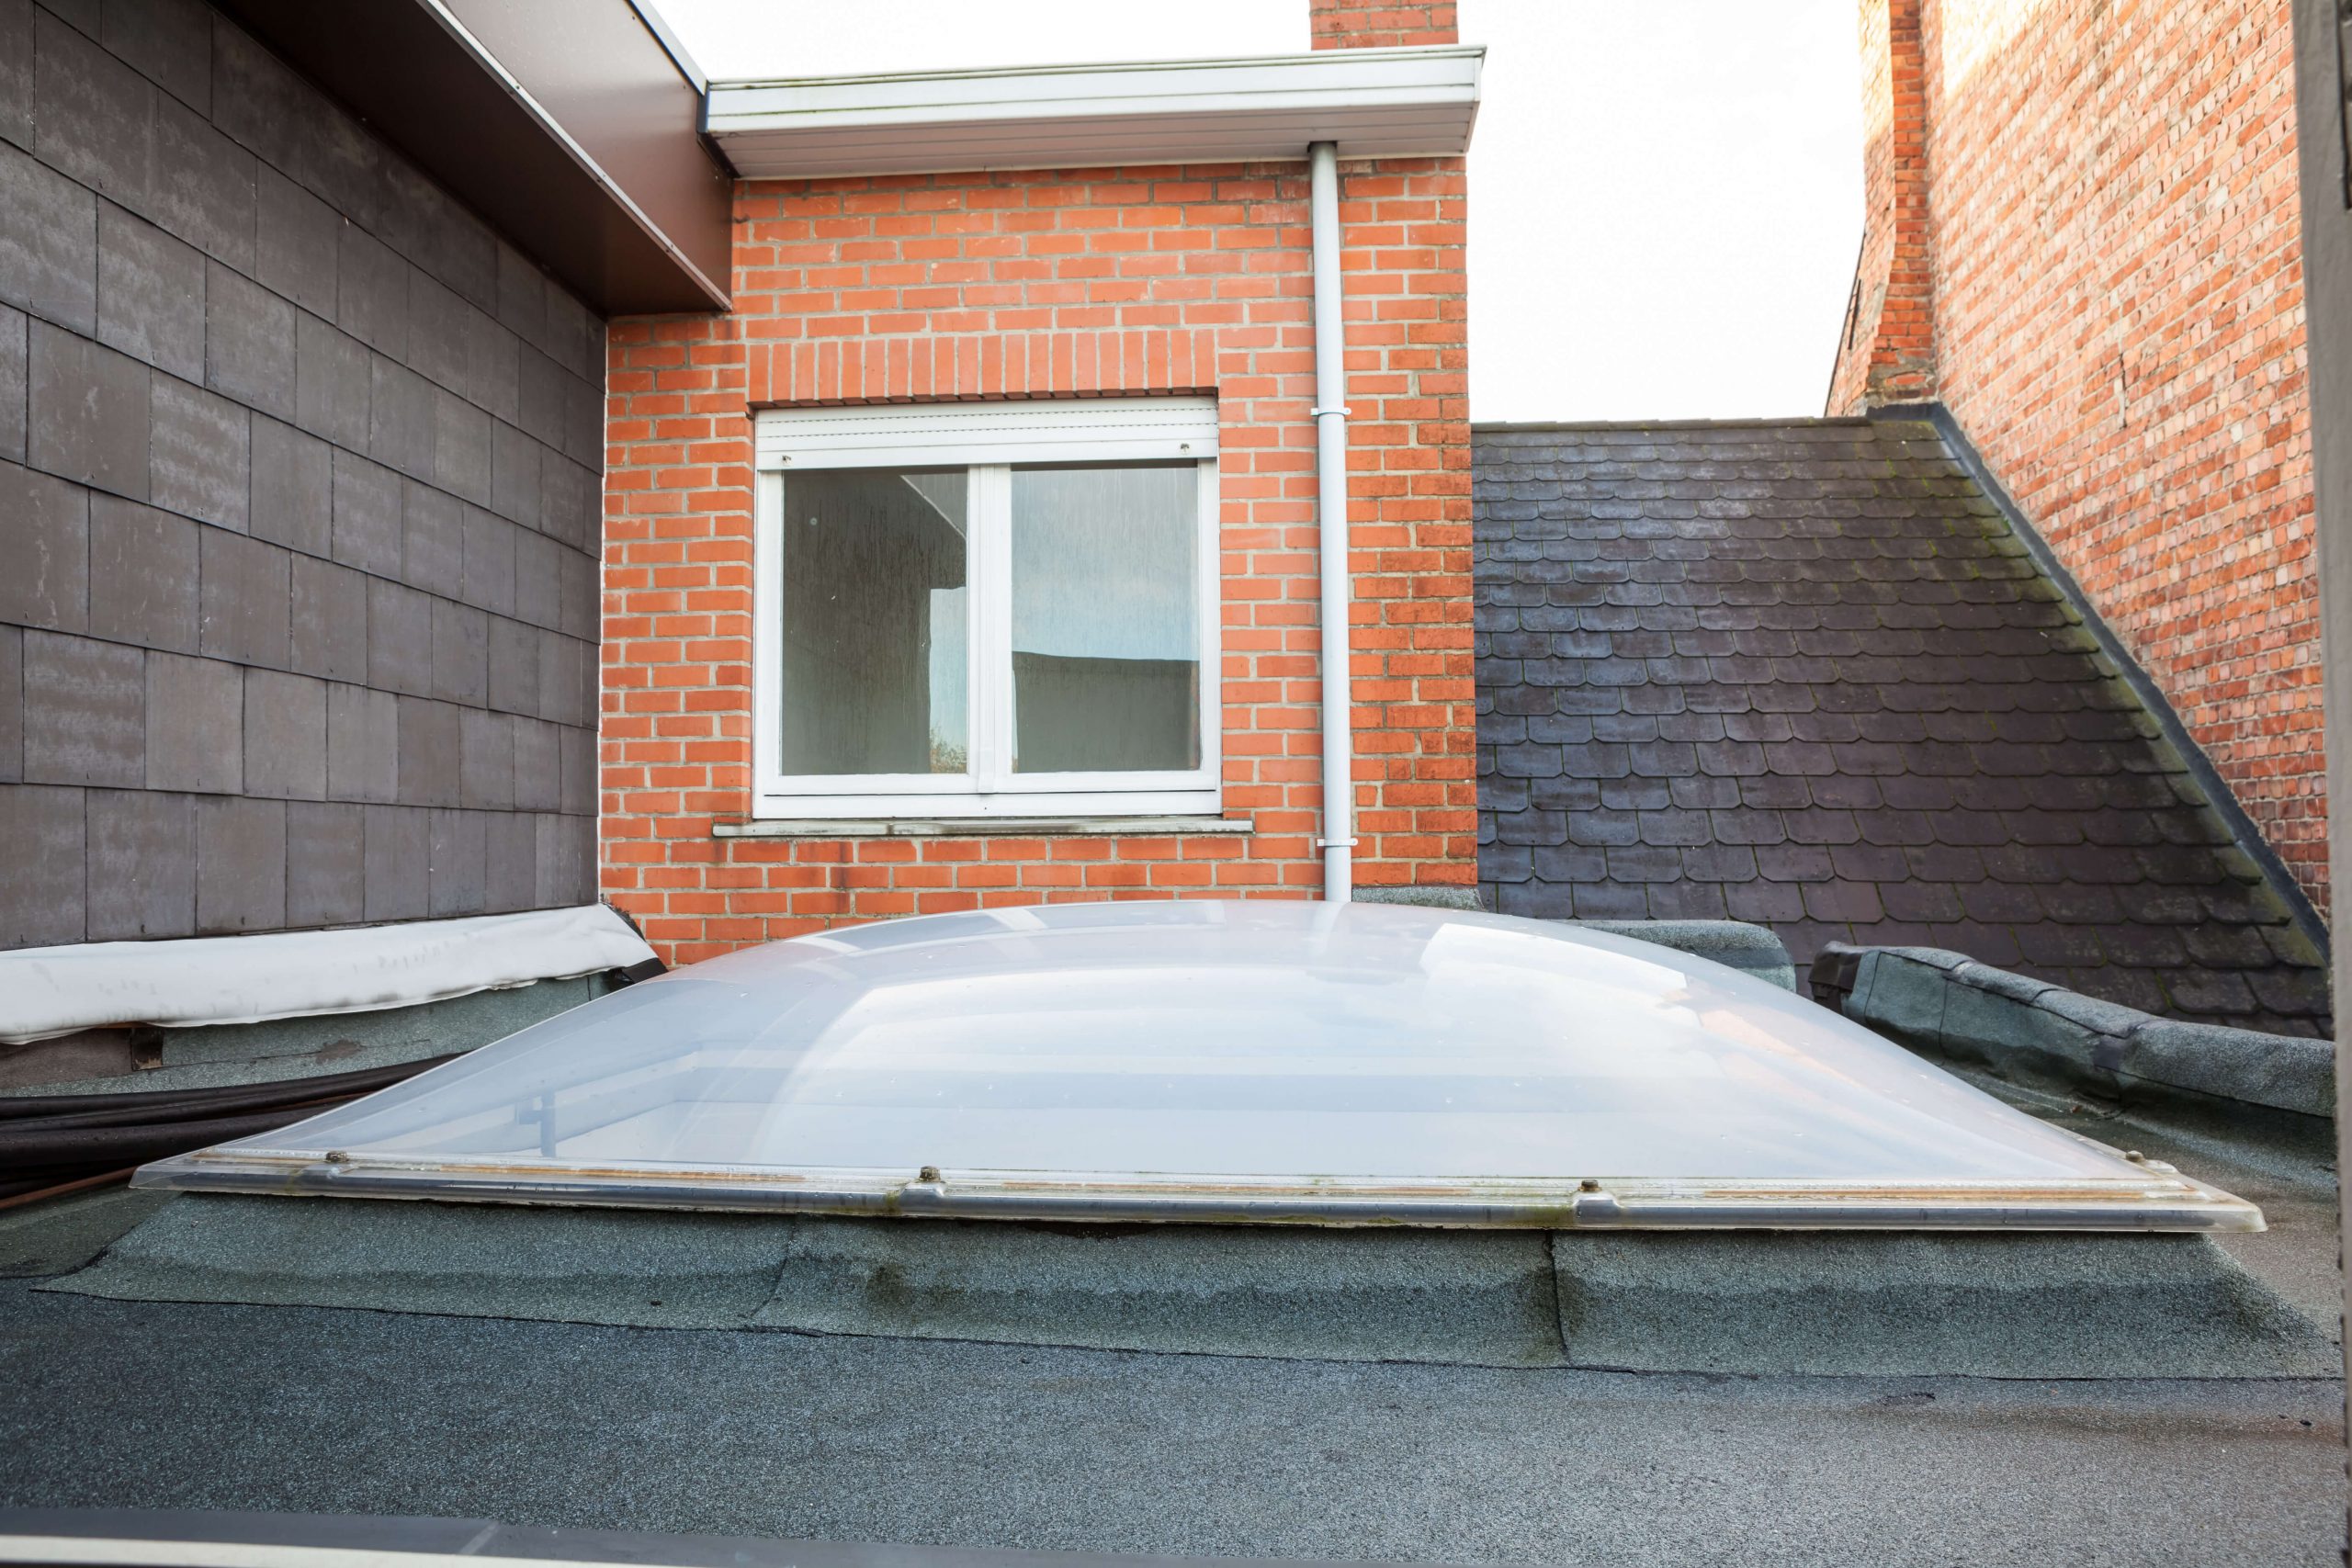 How to spot a damaged flat roof when looking at a property to buy